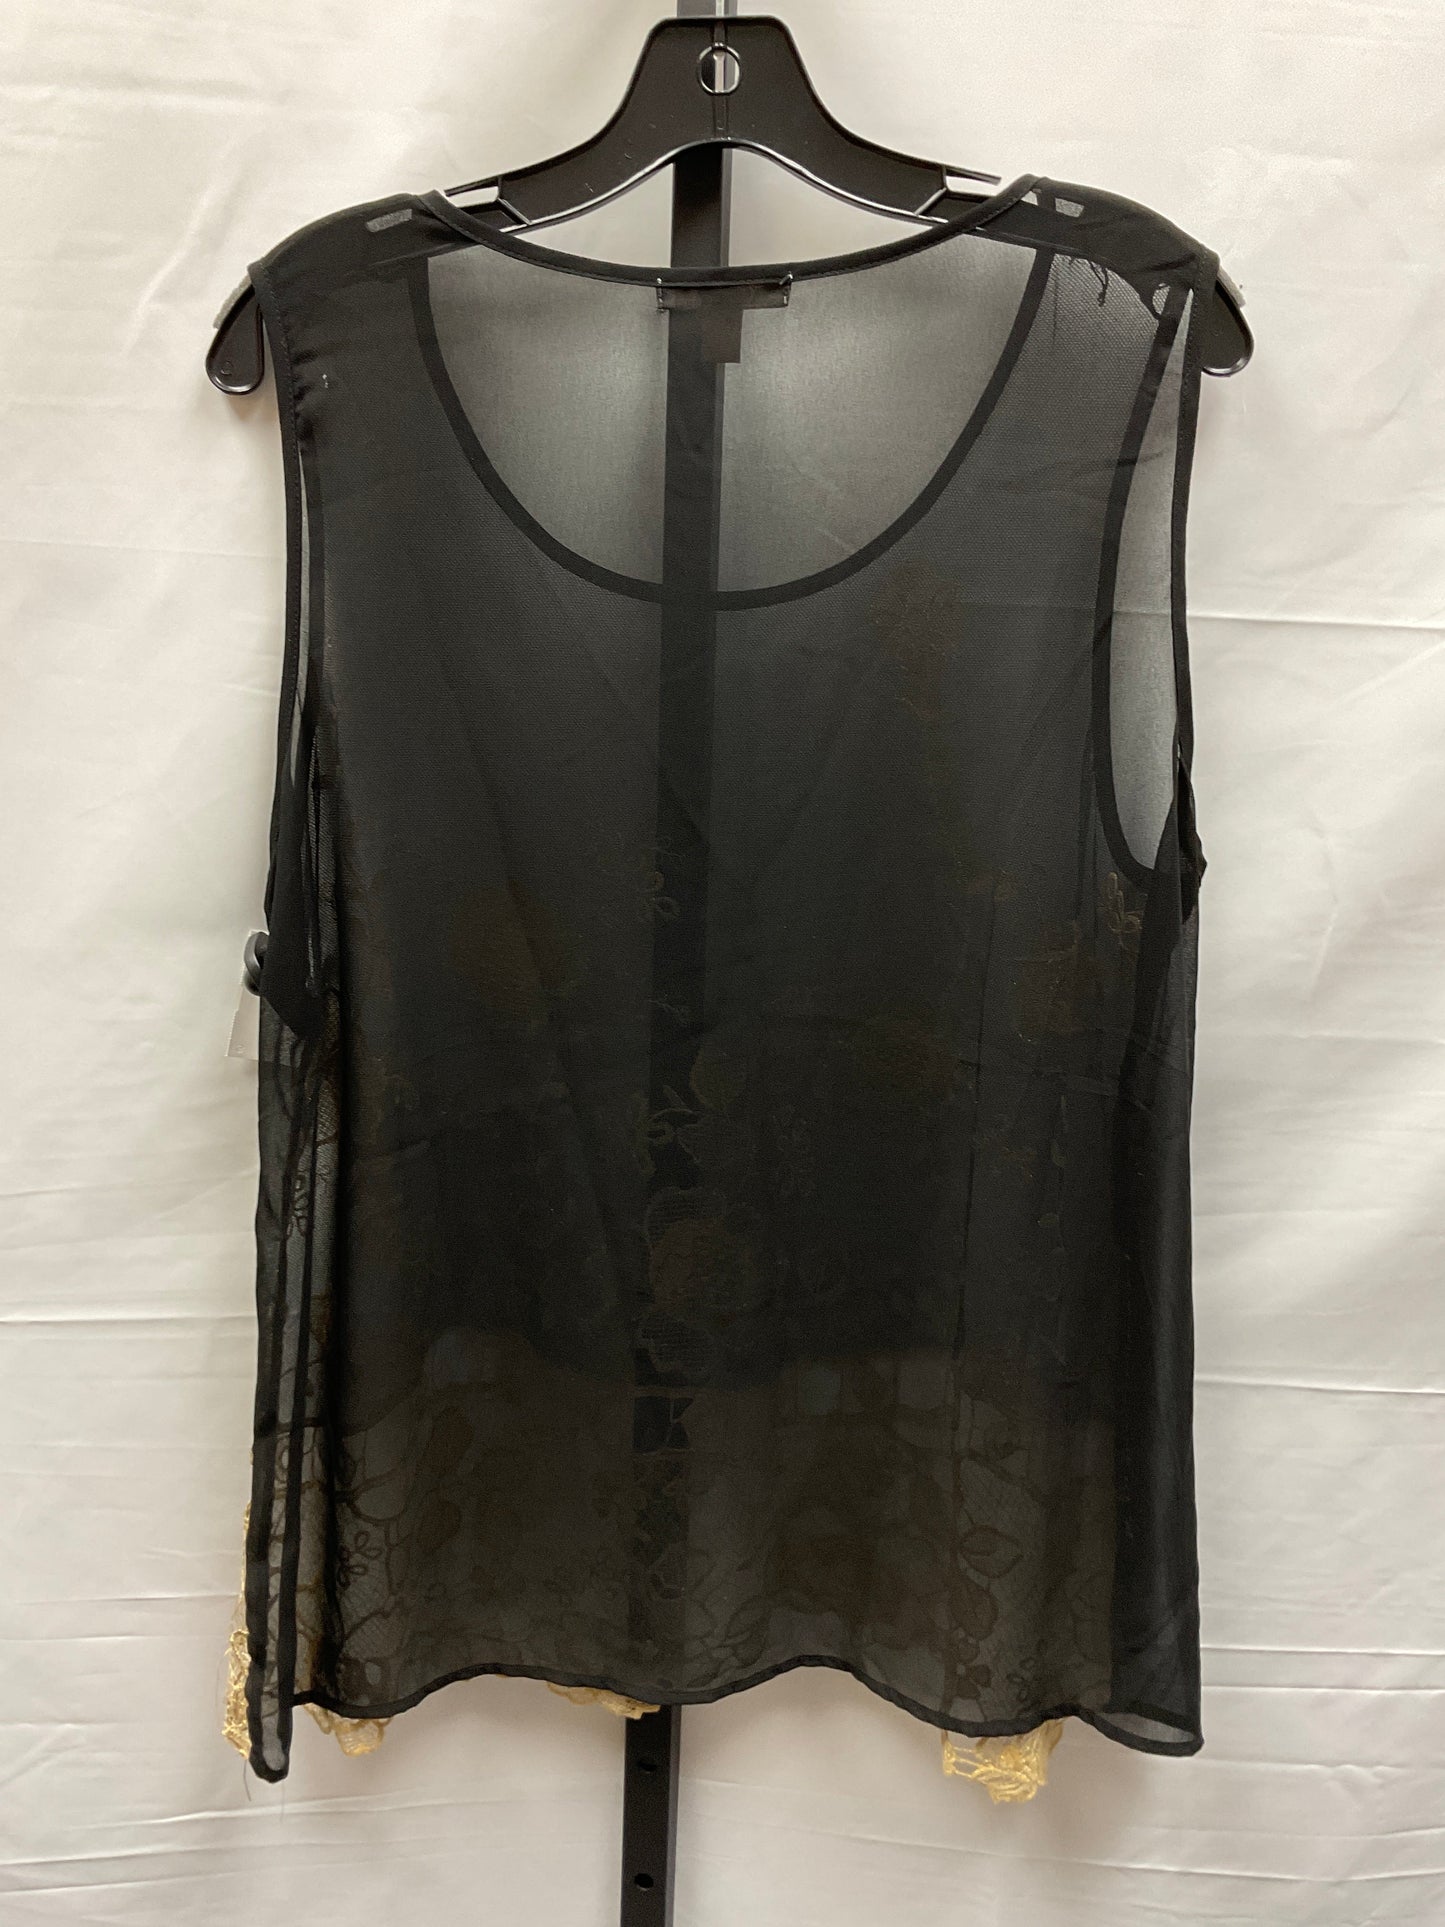 Black & Gold Top Sleeveless Roz And Ali, Size 1x